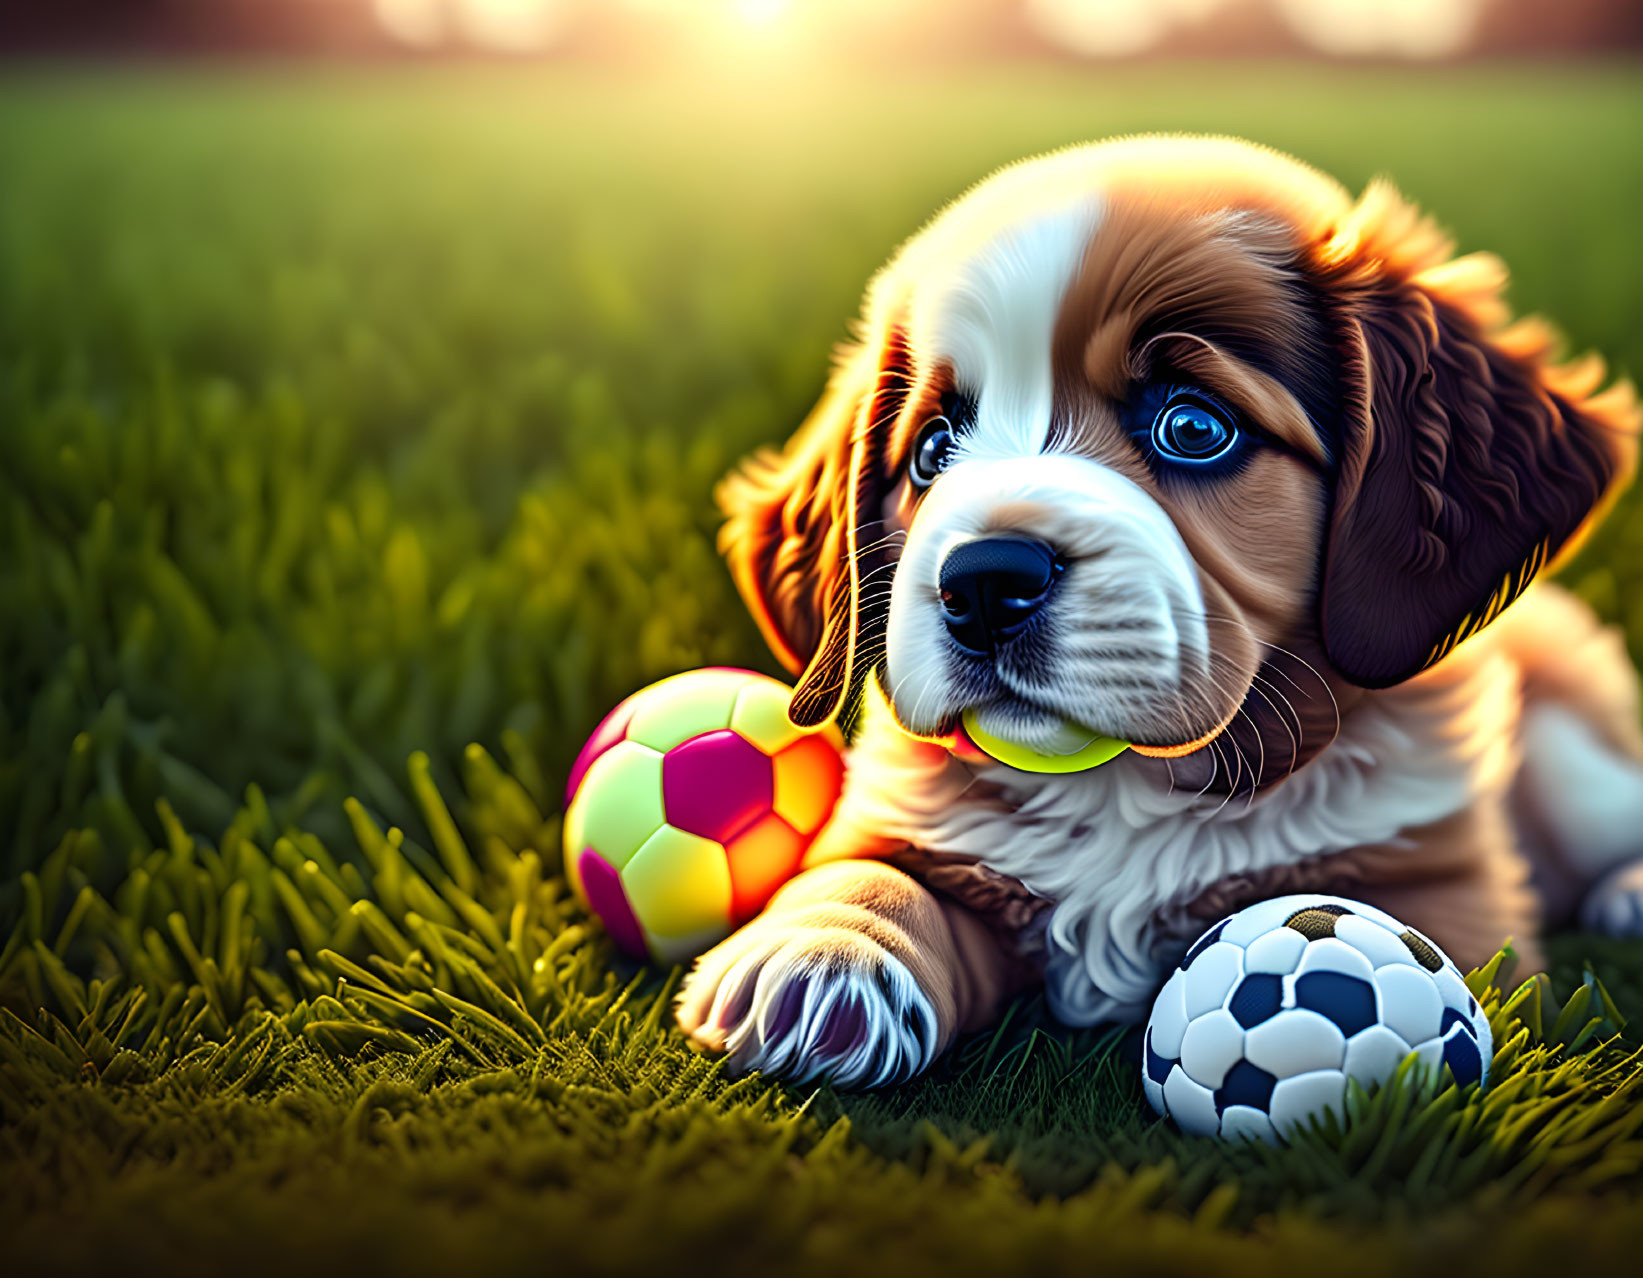 Brown and White Puppy in Grass with Soccer Balls and Sunlight